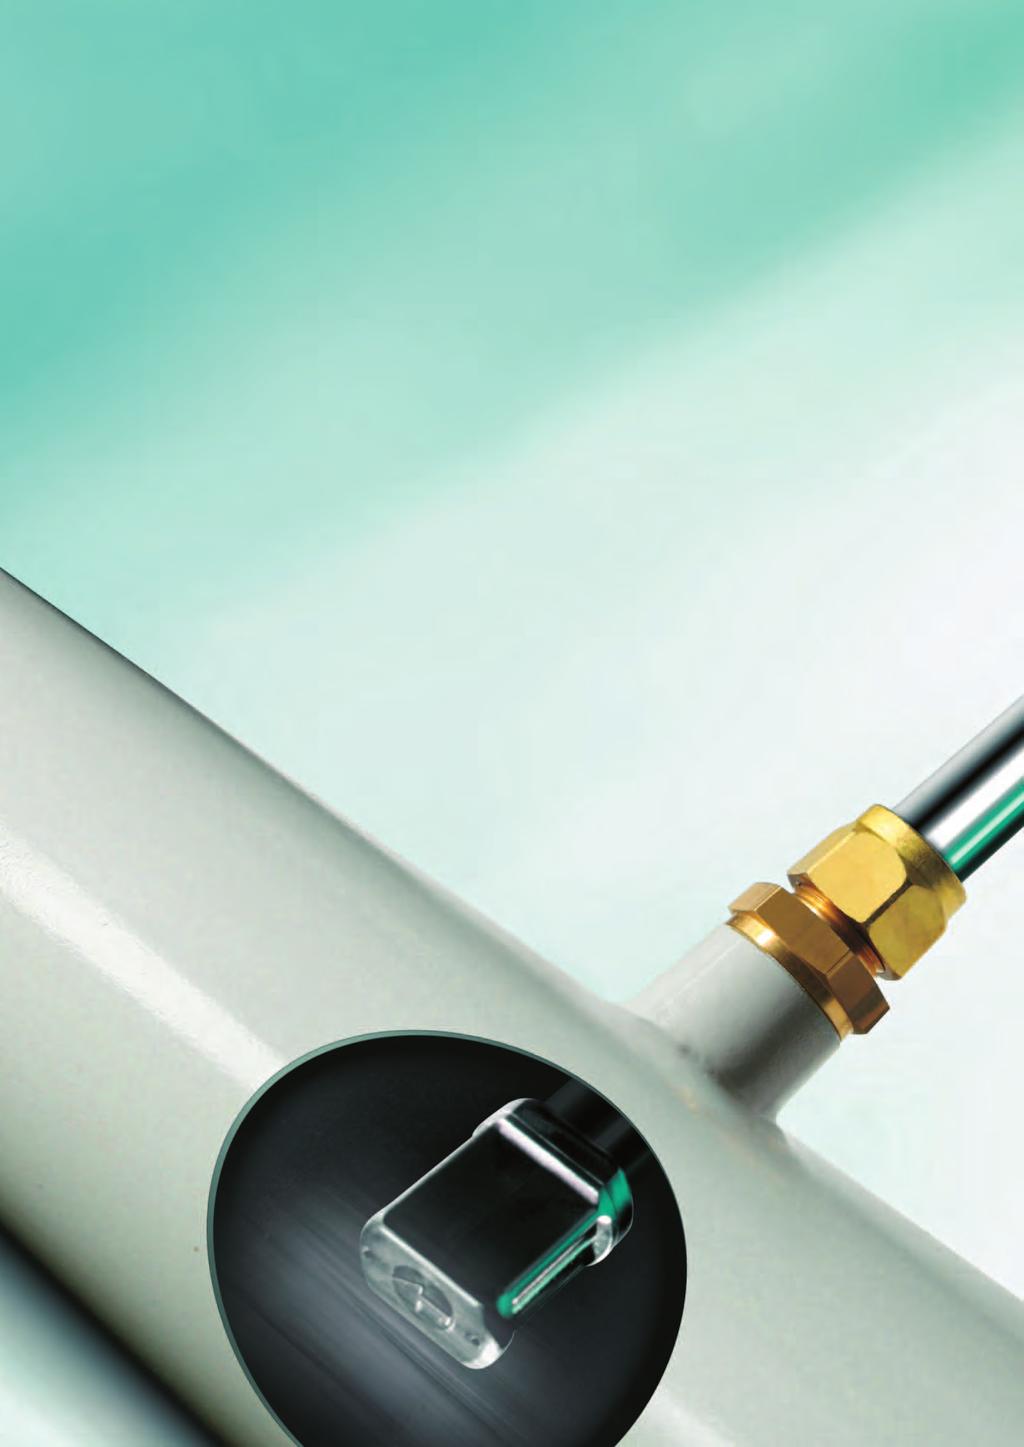 SCHMIDT Flow Sensors Solutions for measuring technology in practice SCHMIDT Technology is a specialist in the development and production of stationary flow sensors for air and gases.